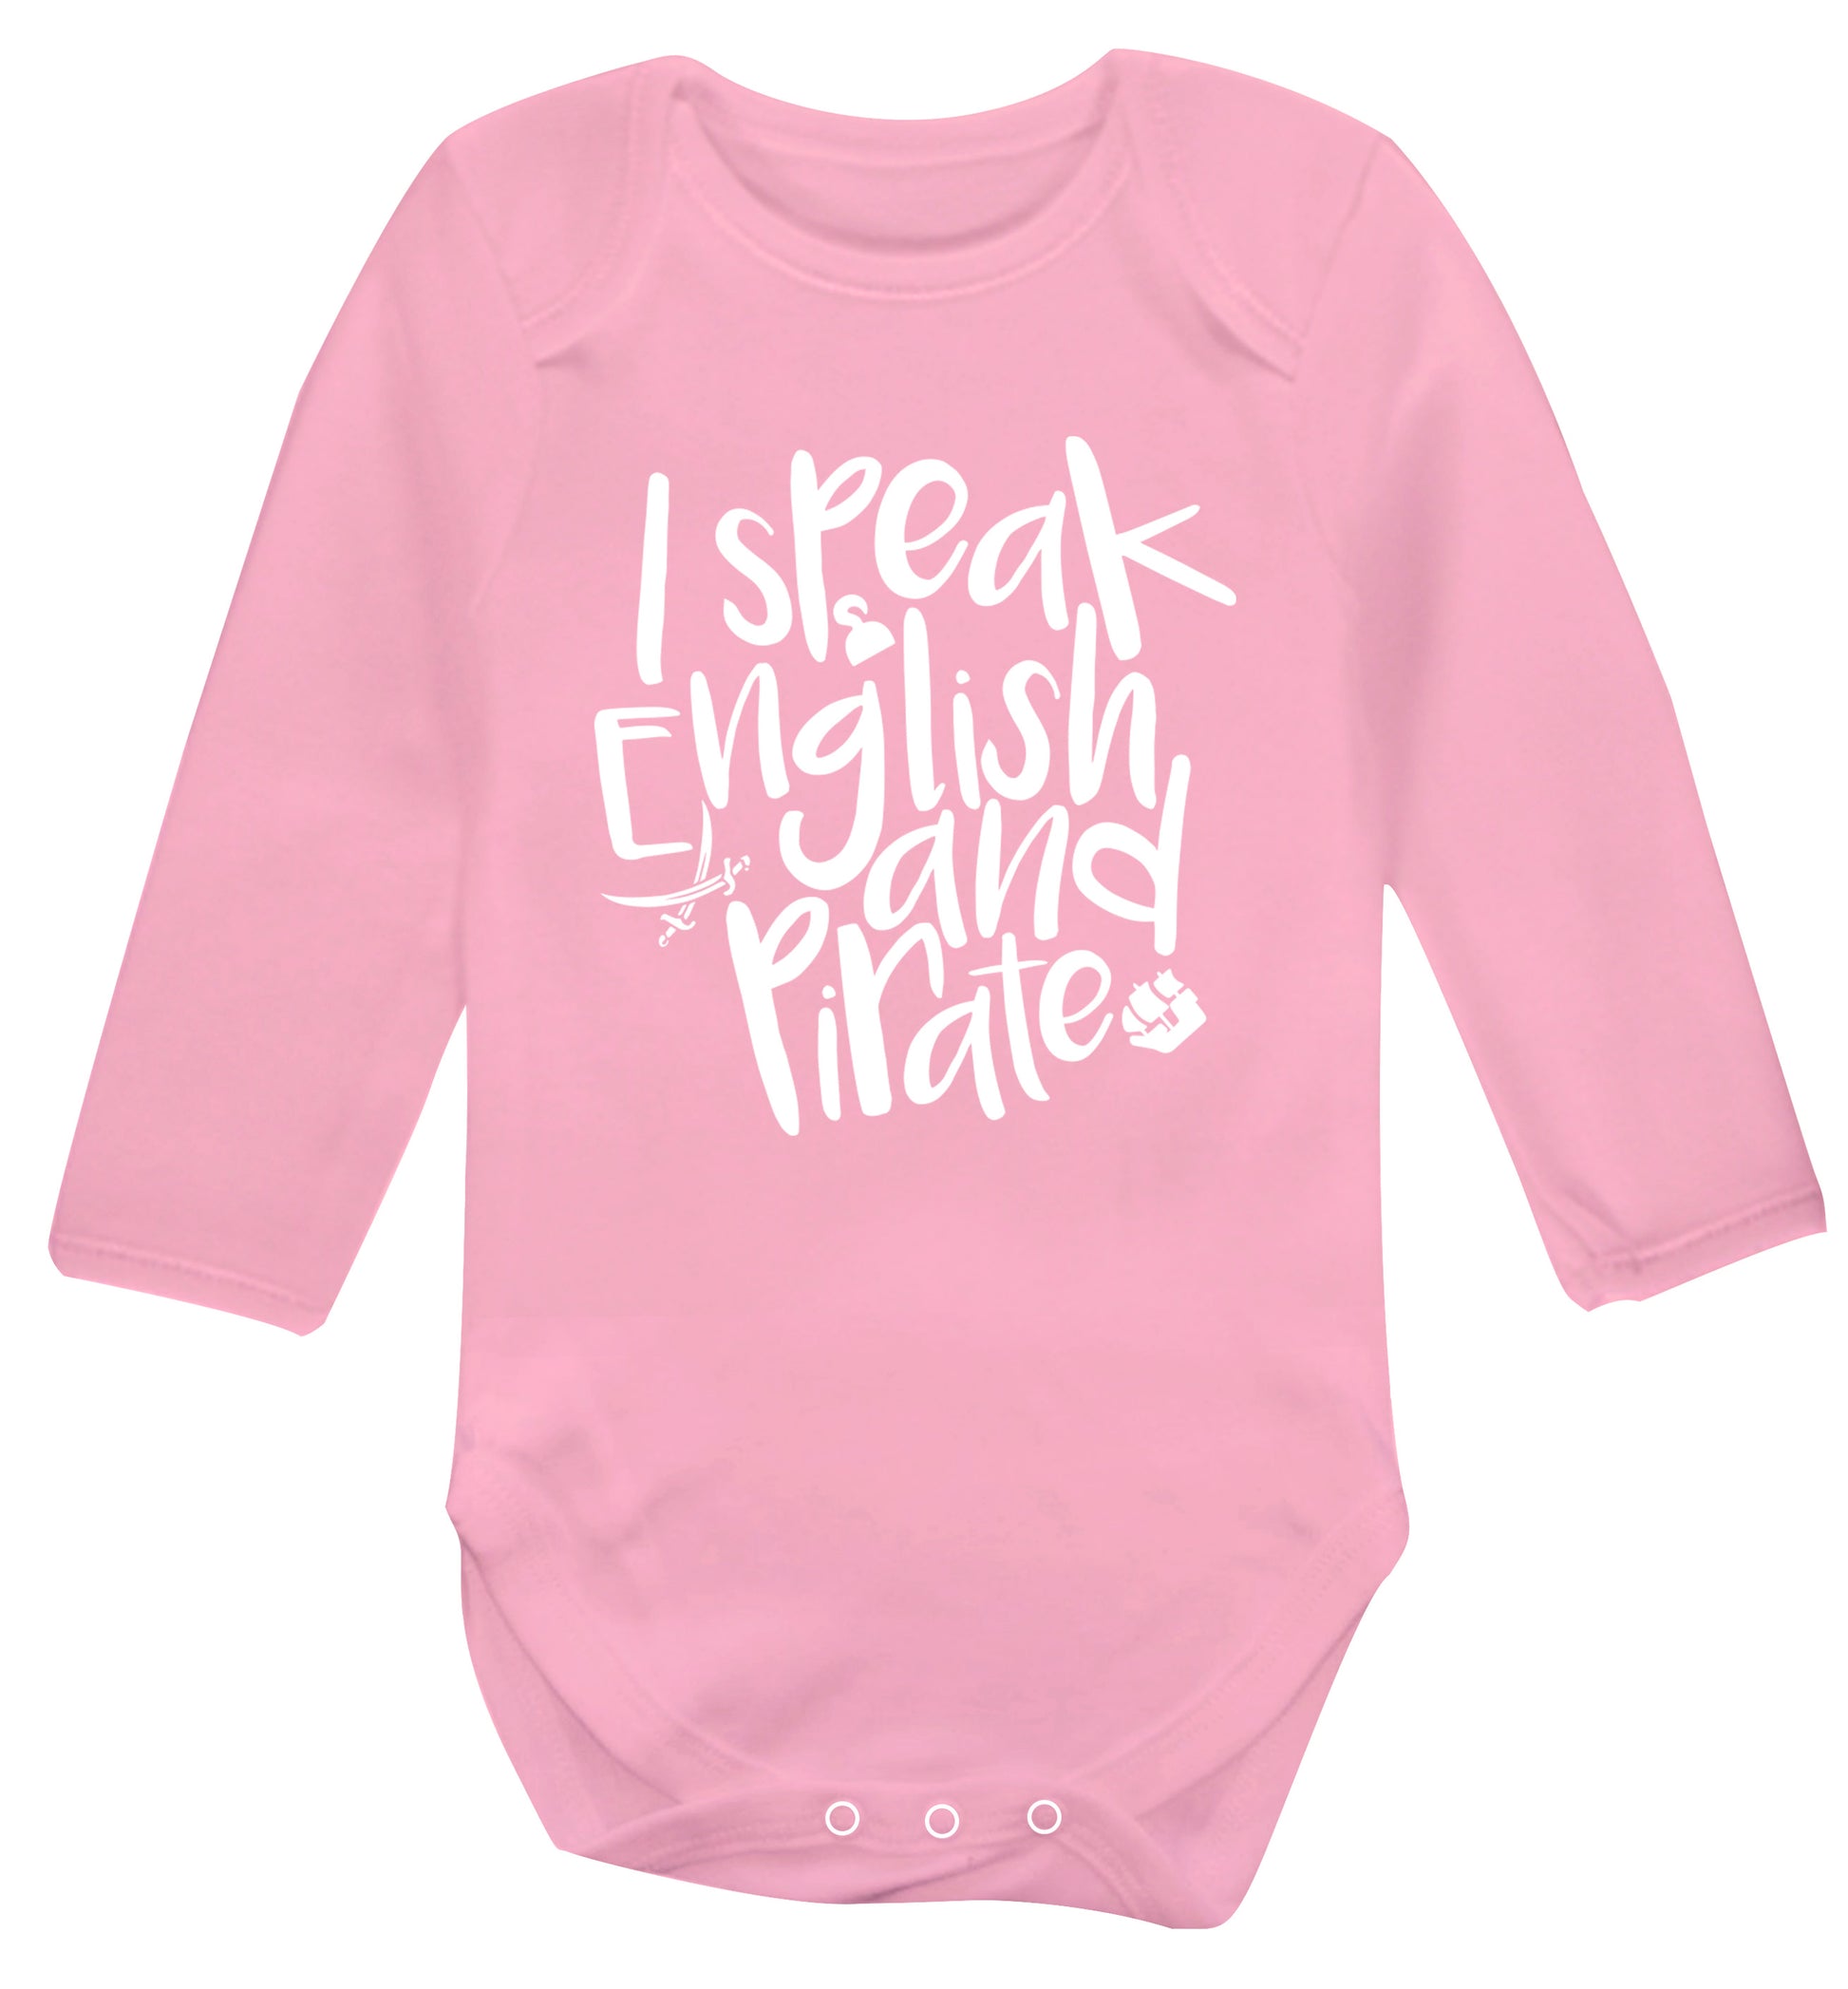 I speak English and pirate Baby Vest long sleeved pale pink 6-12 months